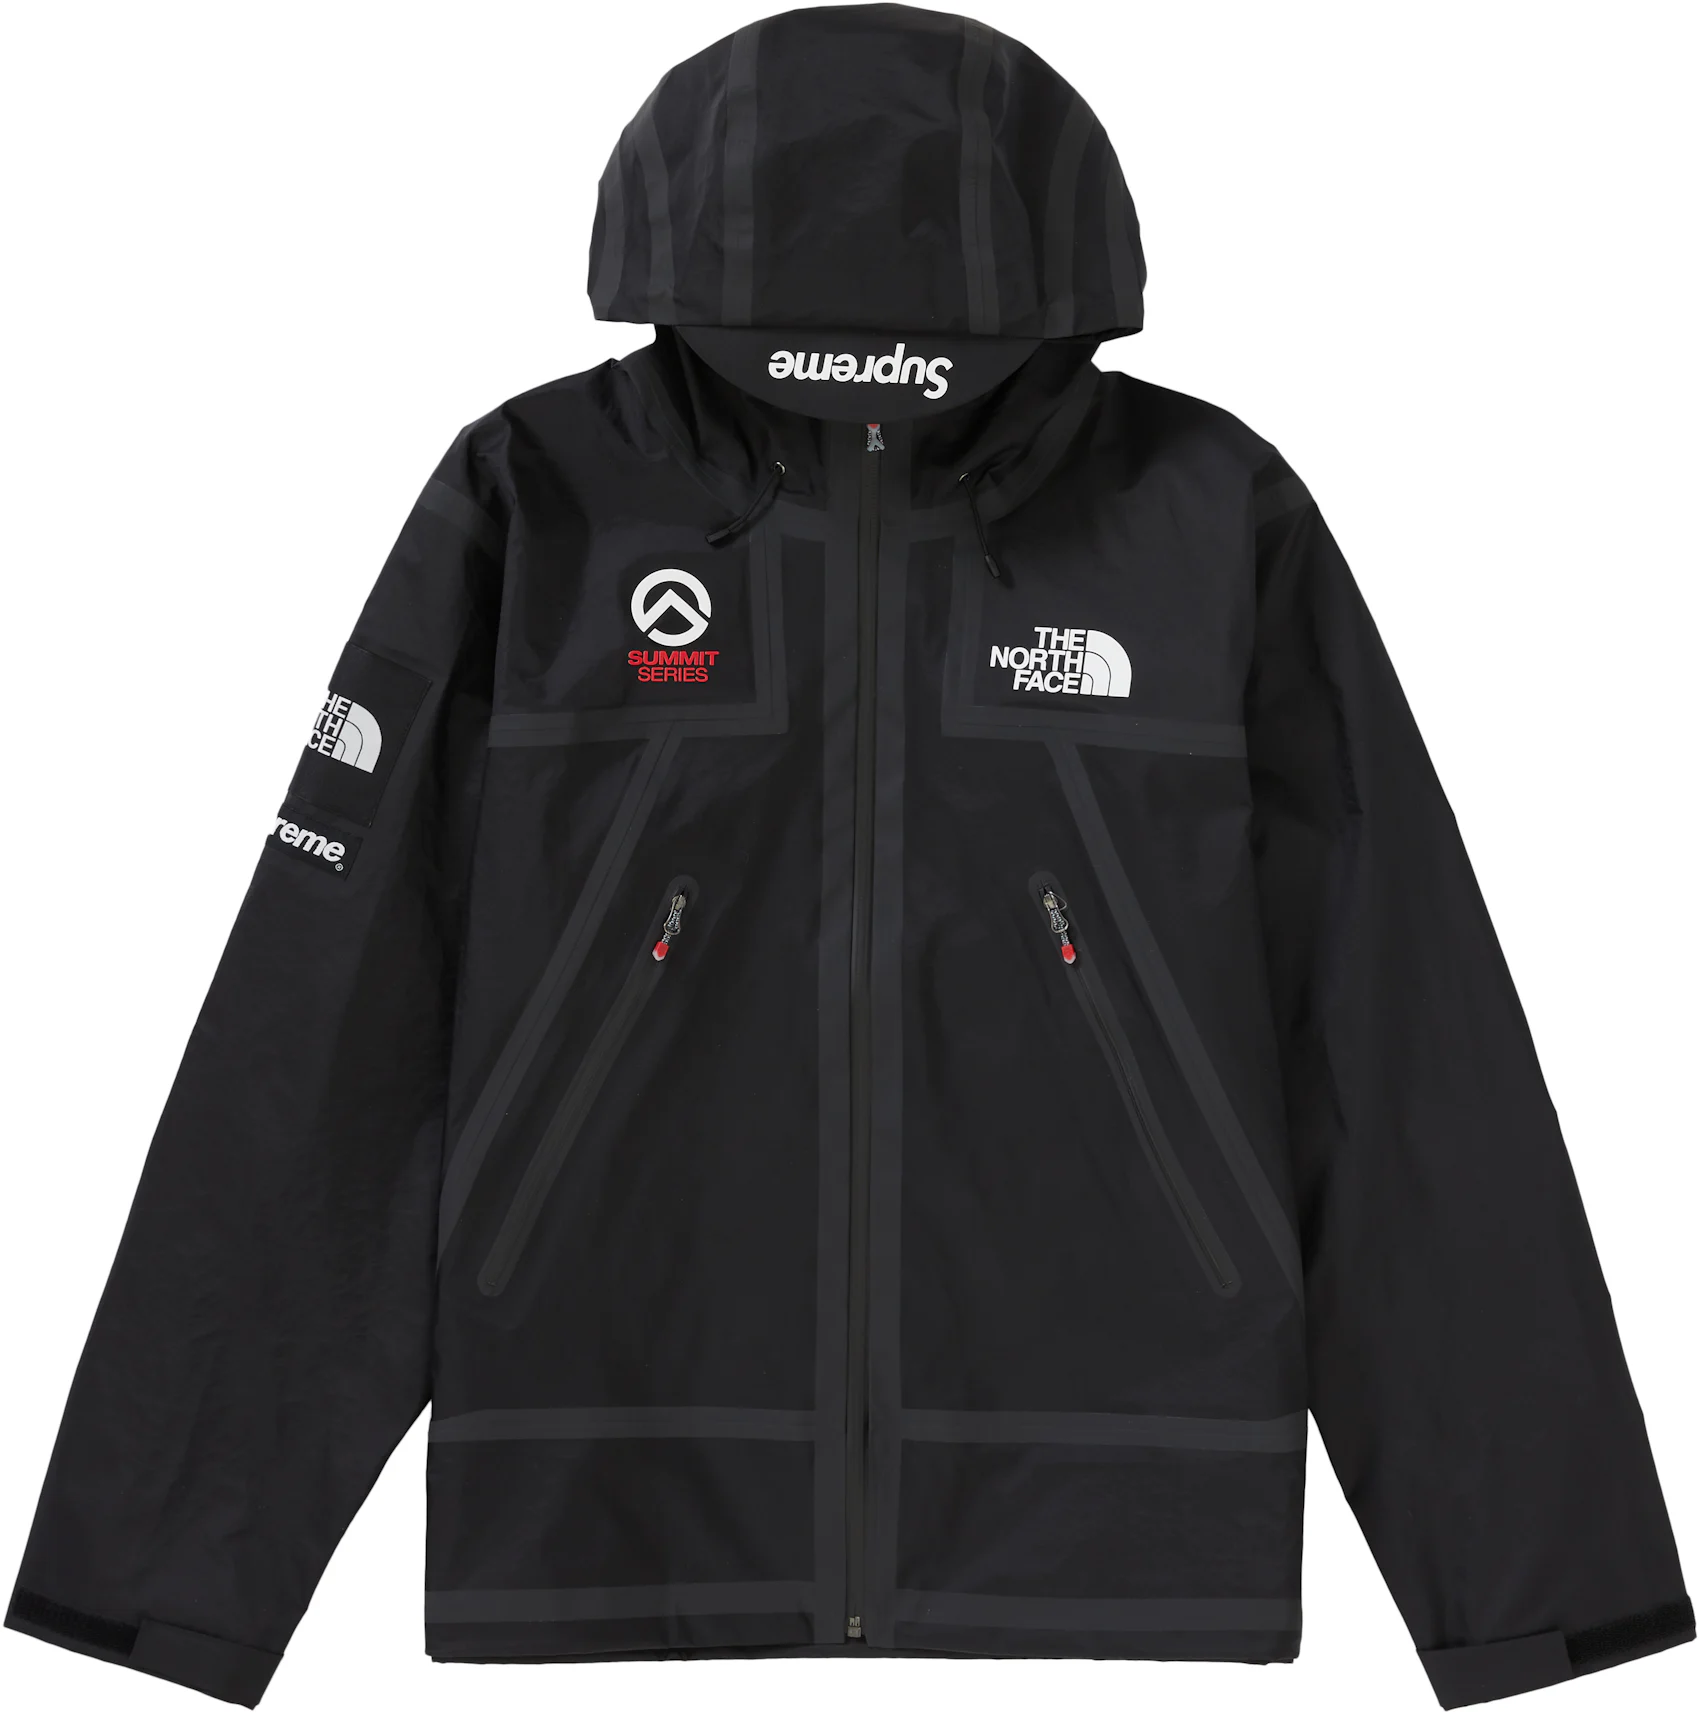 https://images.stockx.com/images/Supreme-The-North-Face-Summit-Series-Outer-Tape-Seam-Jacket-Black.jpg?fit=fill&bg=FFFFFF&w=1200&h=857&fm=webp&auto=compress&dpr=2&trim=color&updated_at=1622129300&q=60